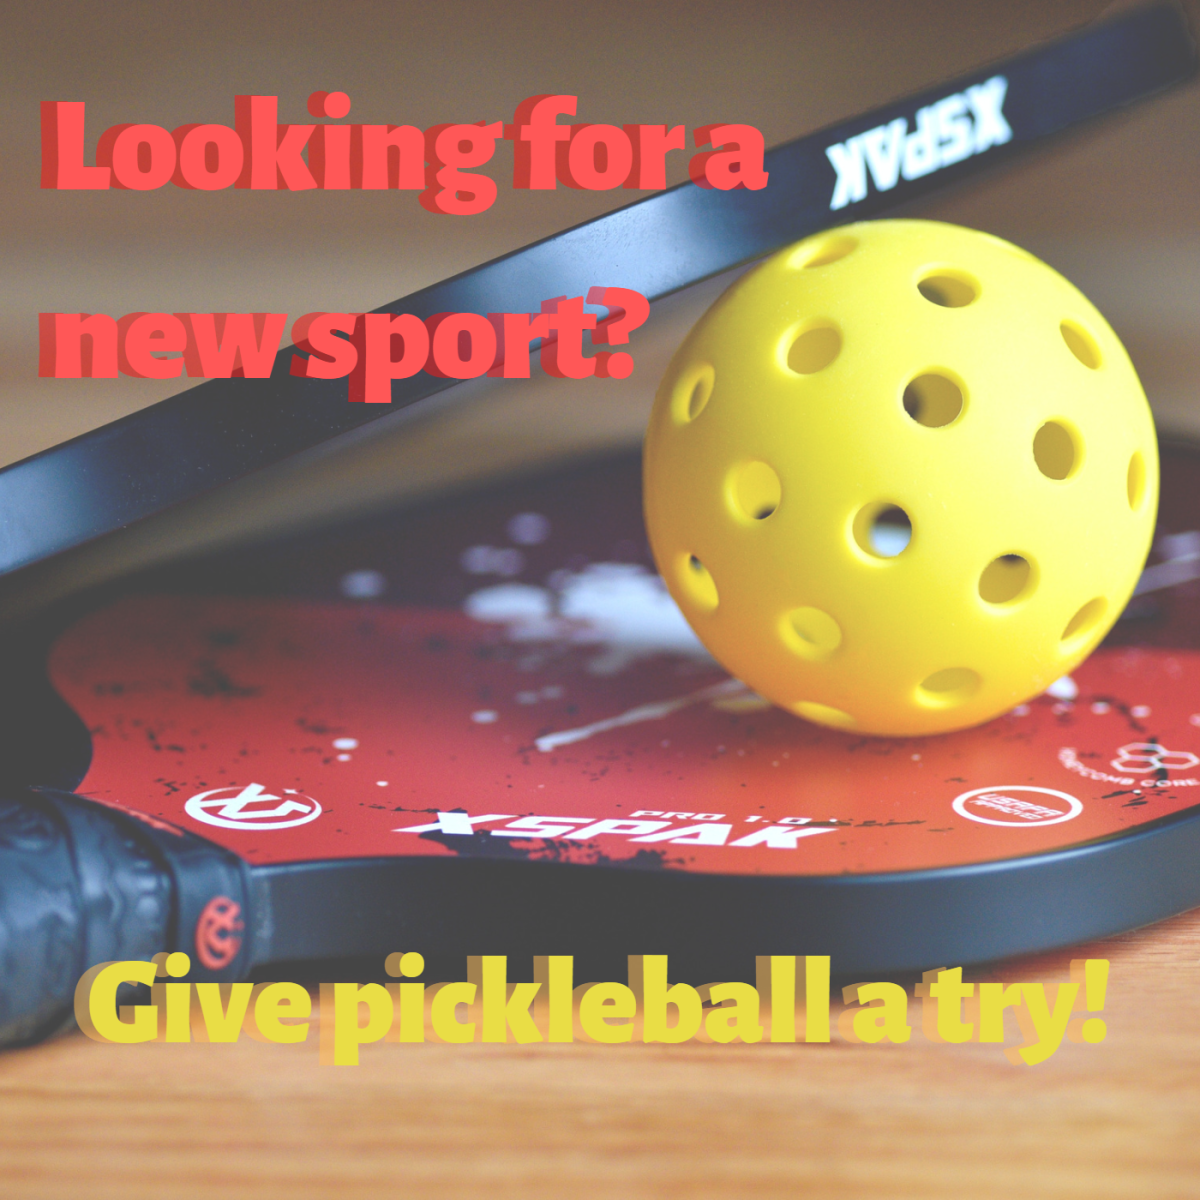 Why I Play Pickleball (and You Should Try It Too!)